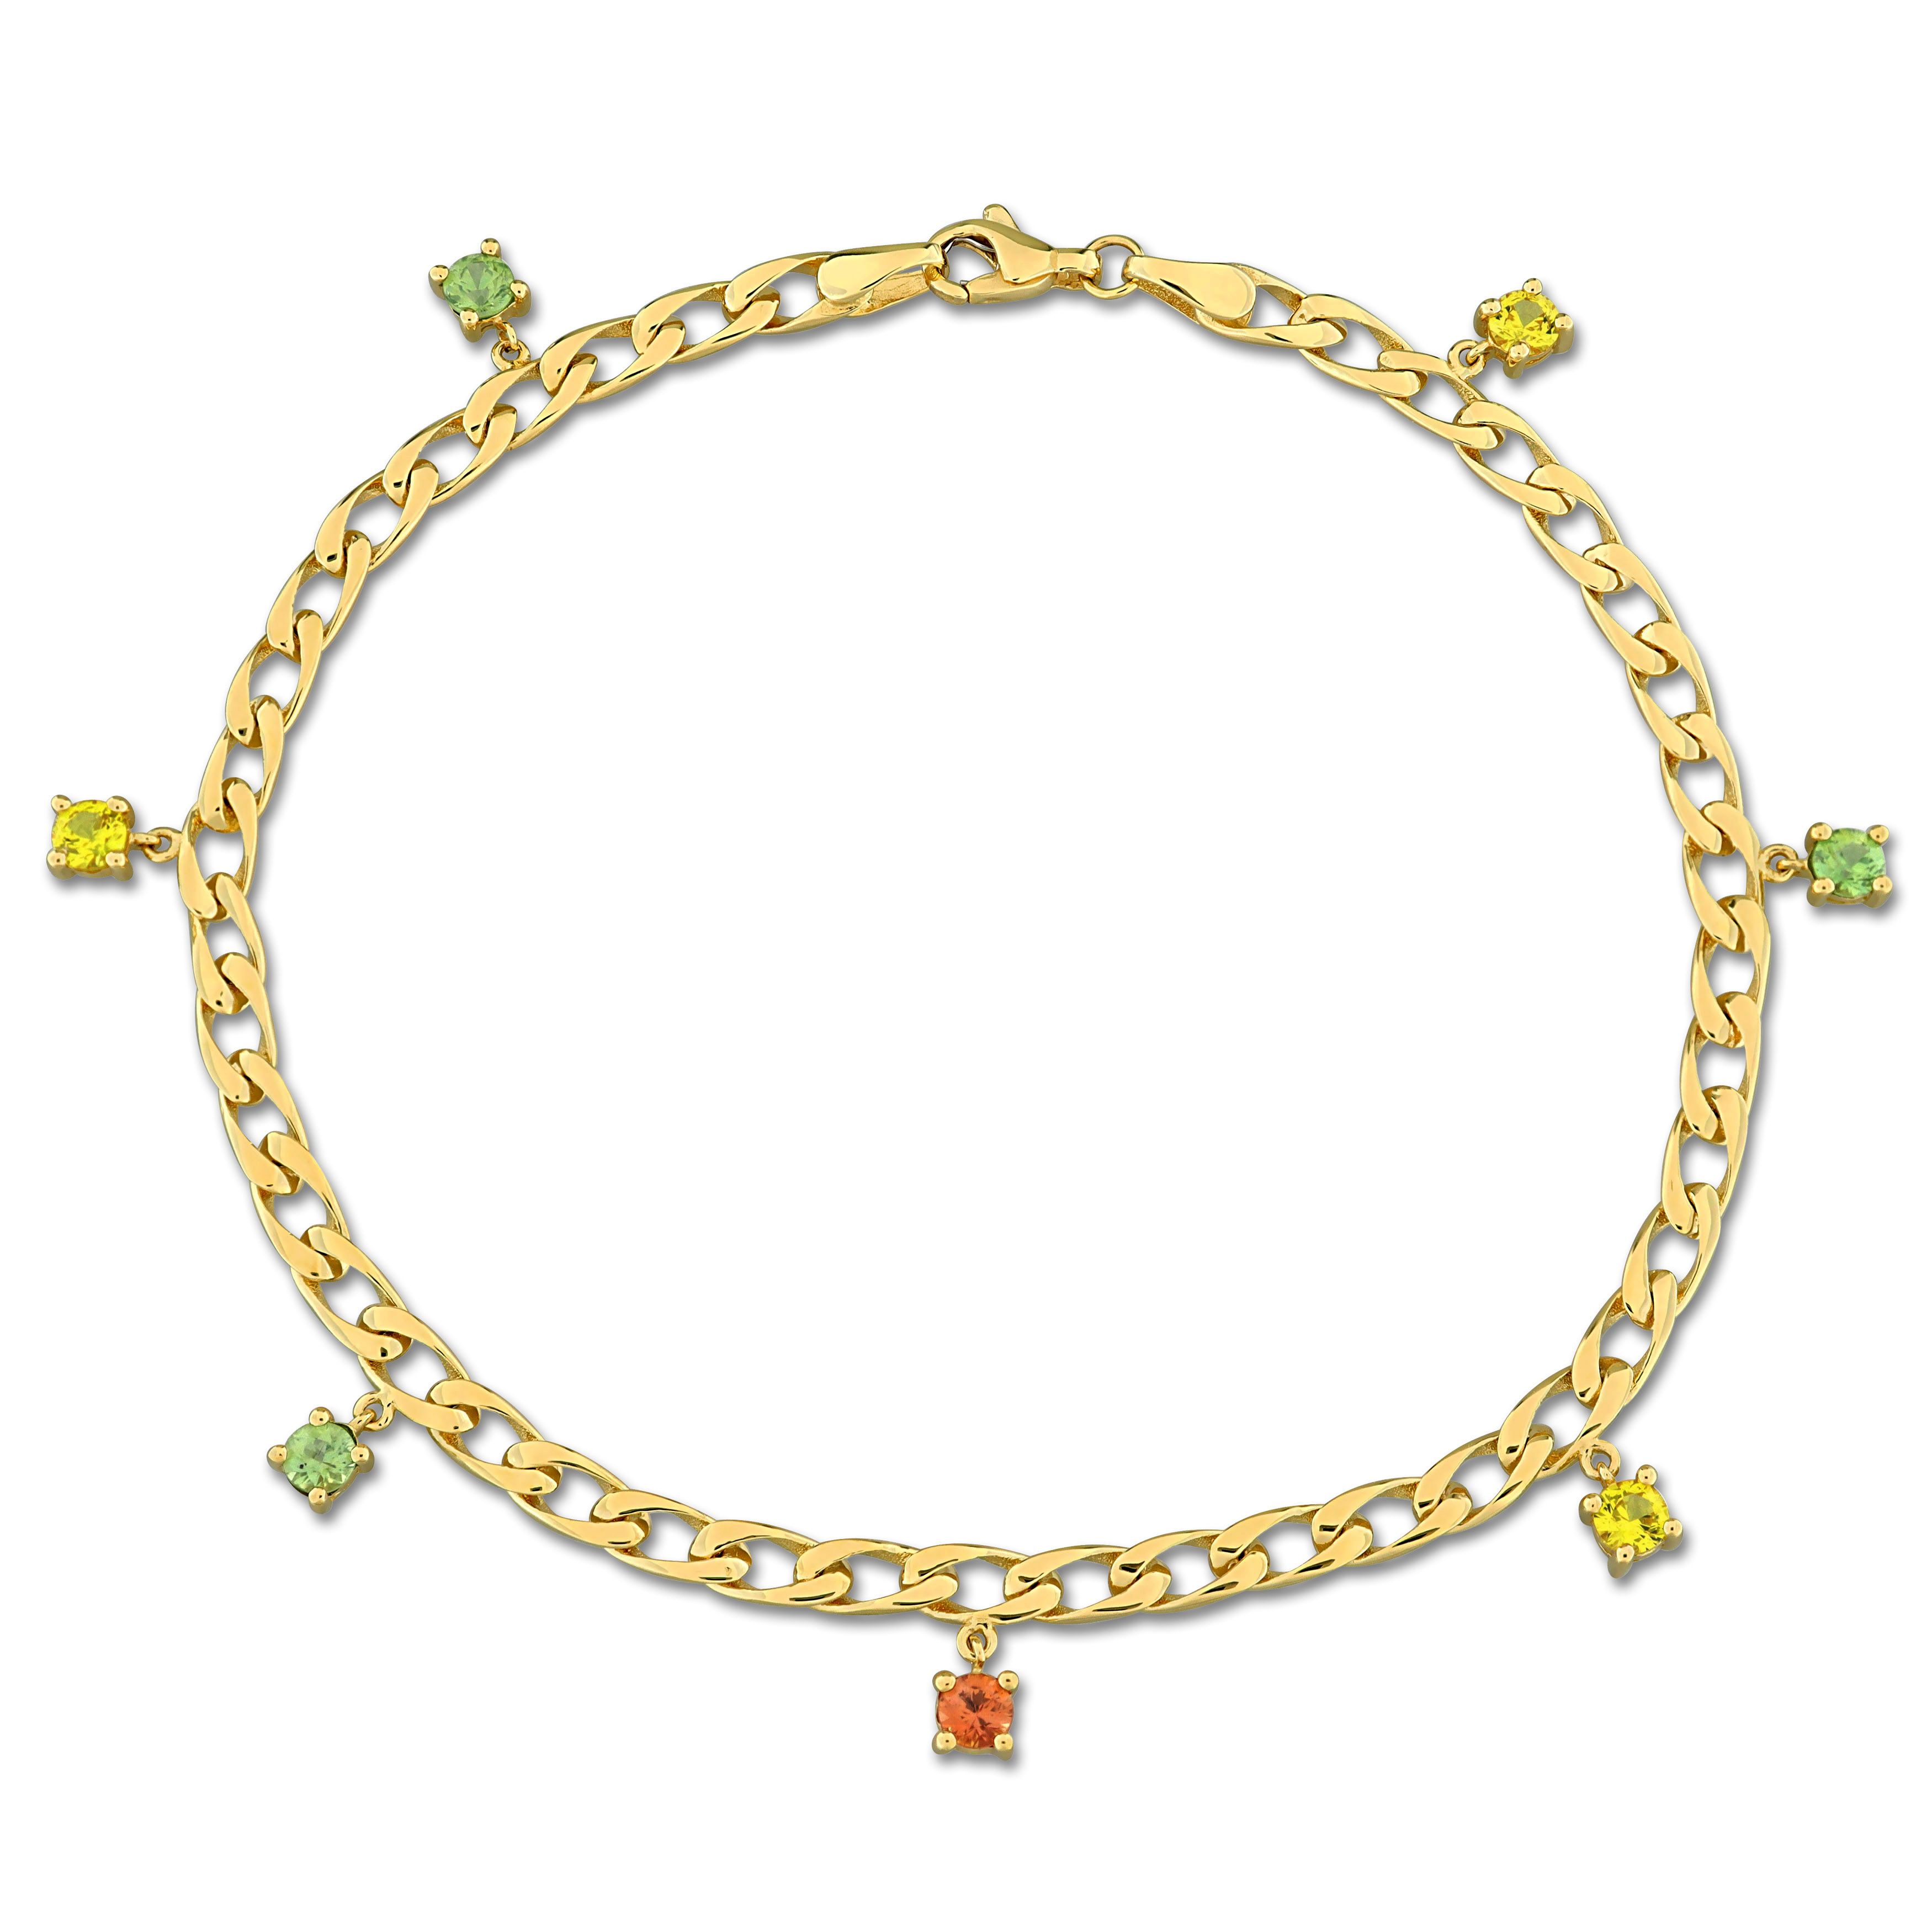 7/8 CT TGW Yellow Green and Orange Sapphire Charm Bracelet in 10k Yellow Gold - 7.5 in.